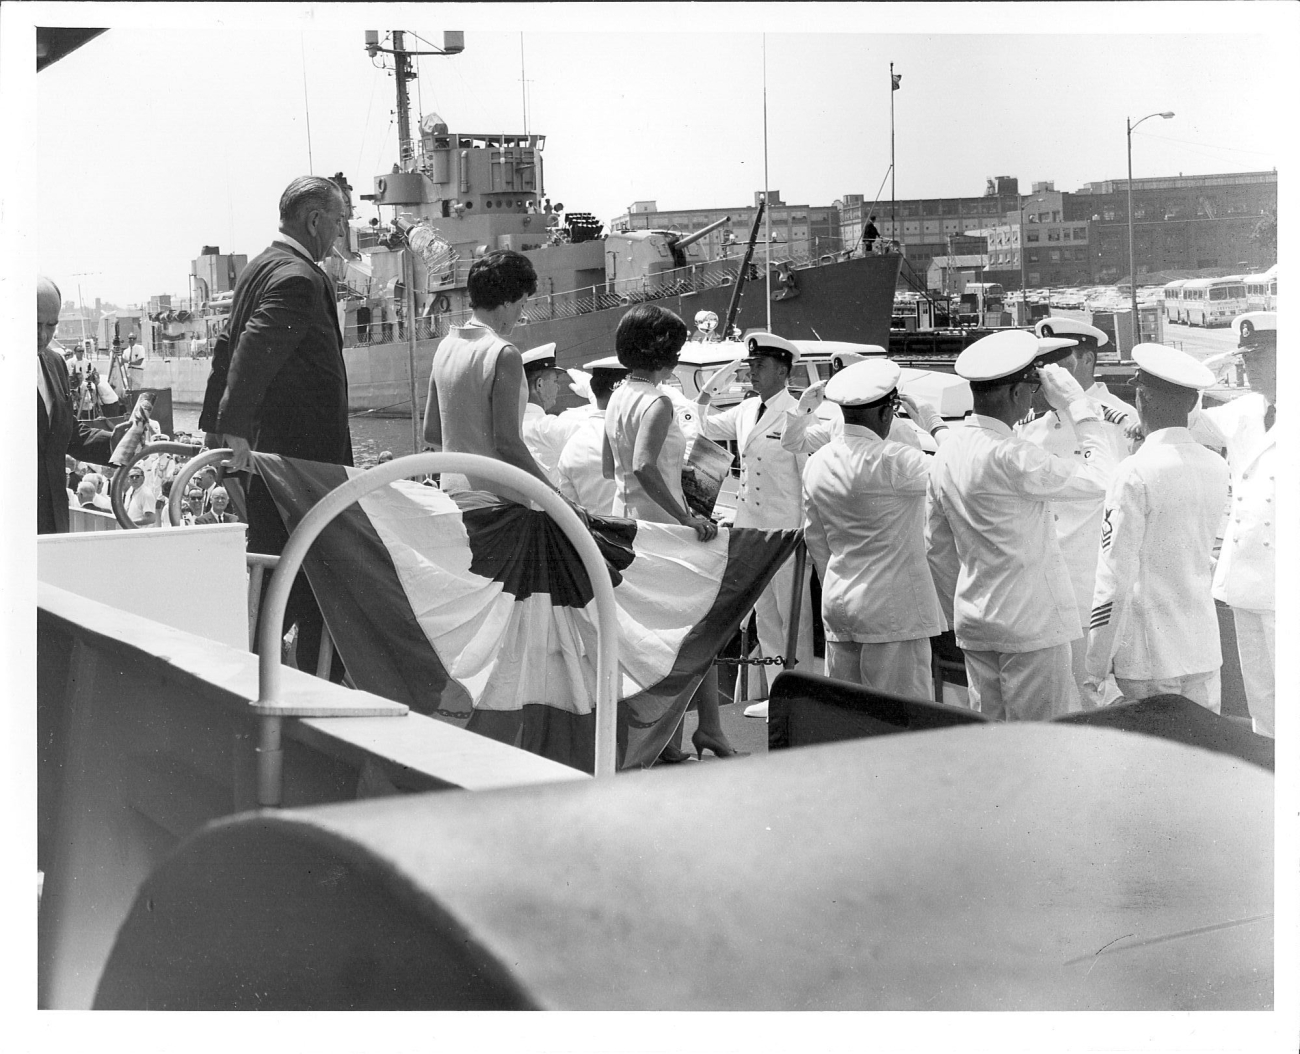 Commissioning ceremony of the USC&GS; Ship OCEANOGRAPHER (OSS 01) atthe Washington Navy Yard with President Johnson in attendance